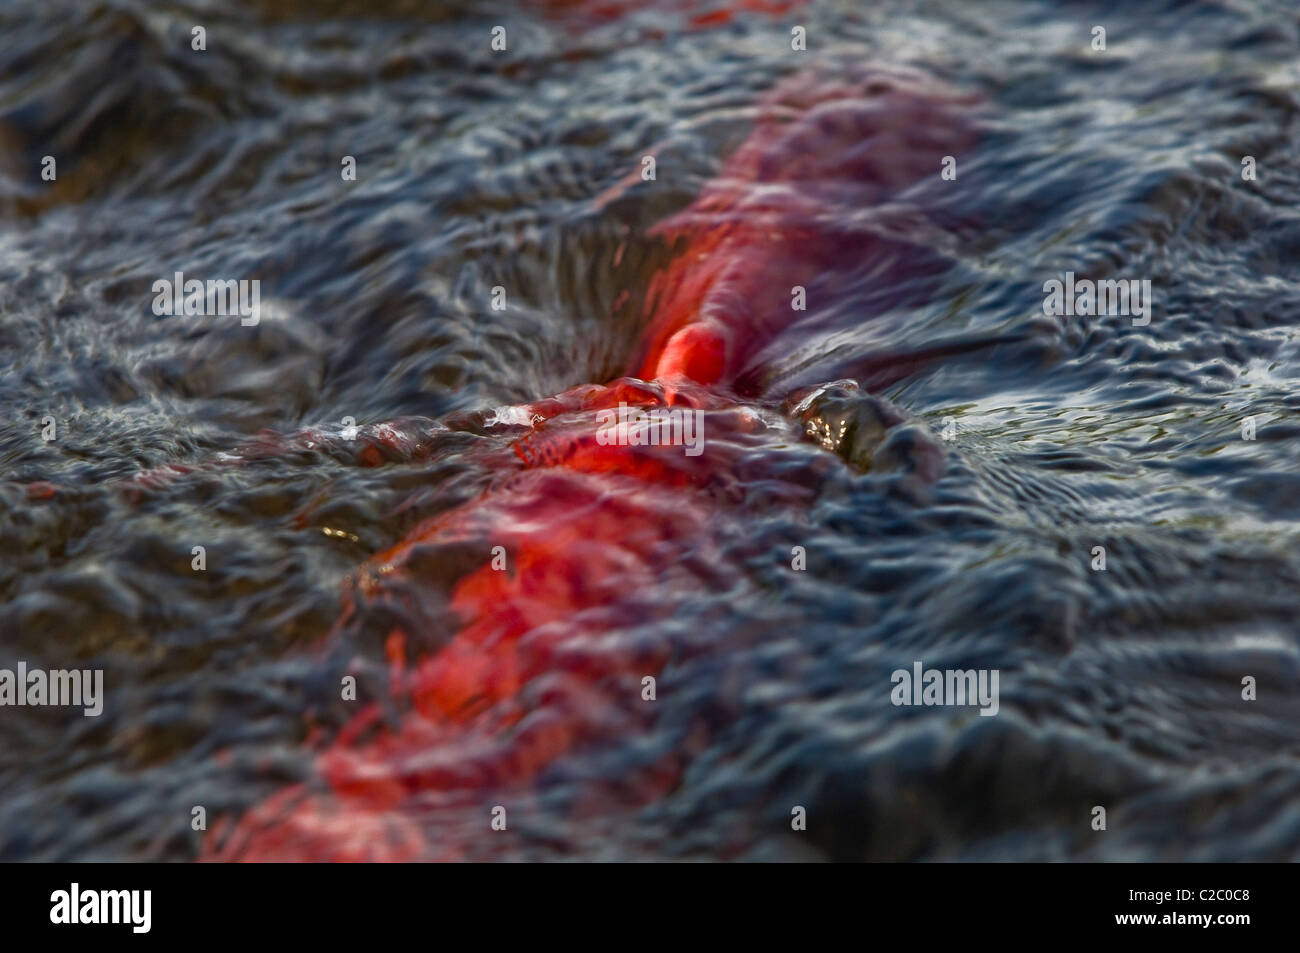 Abstract image of a spawning Red Salmon swimming in a creek in South-Central Alaska. Stock Photo